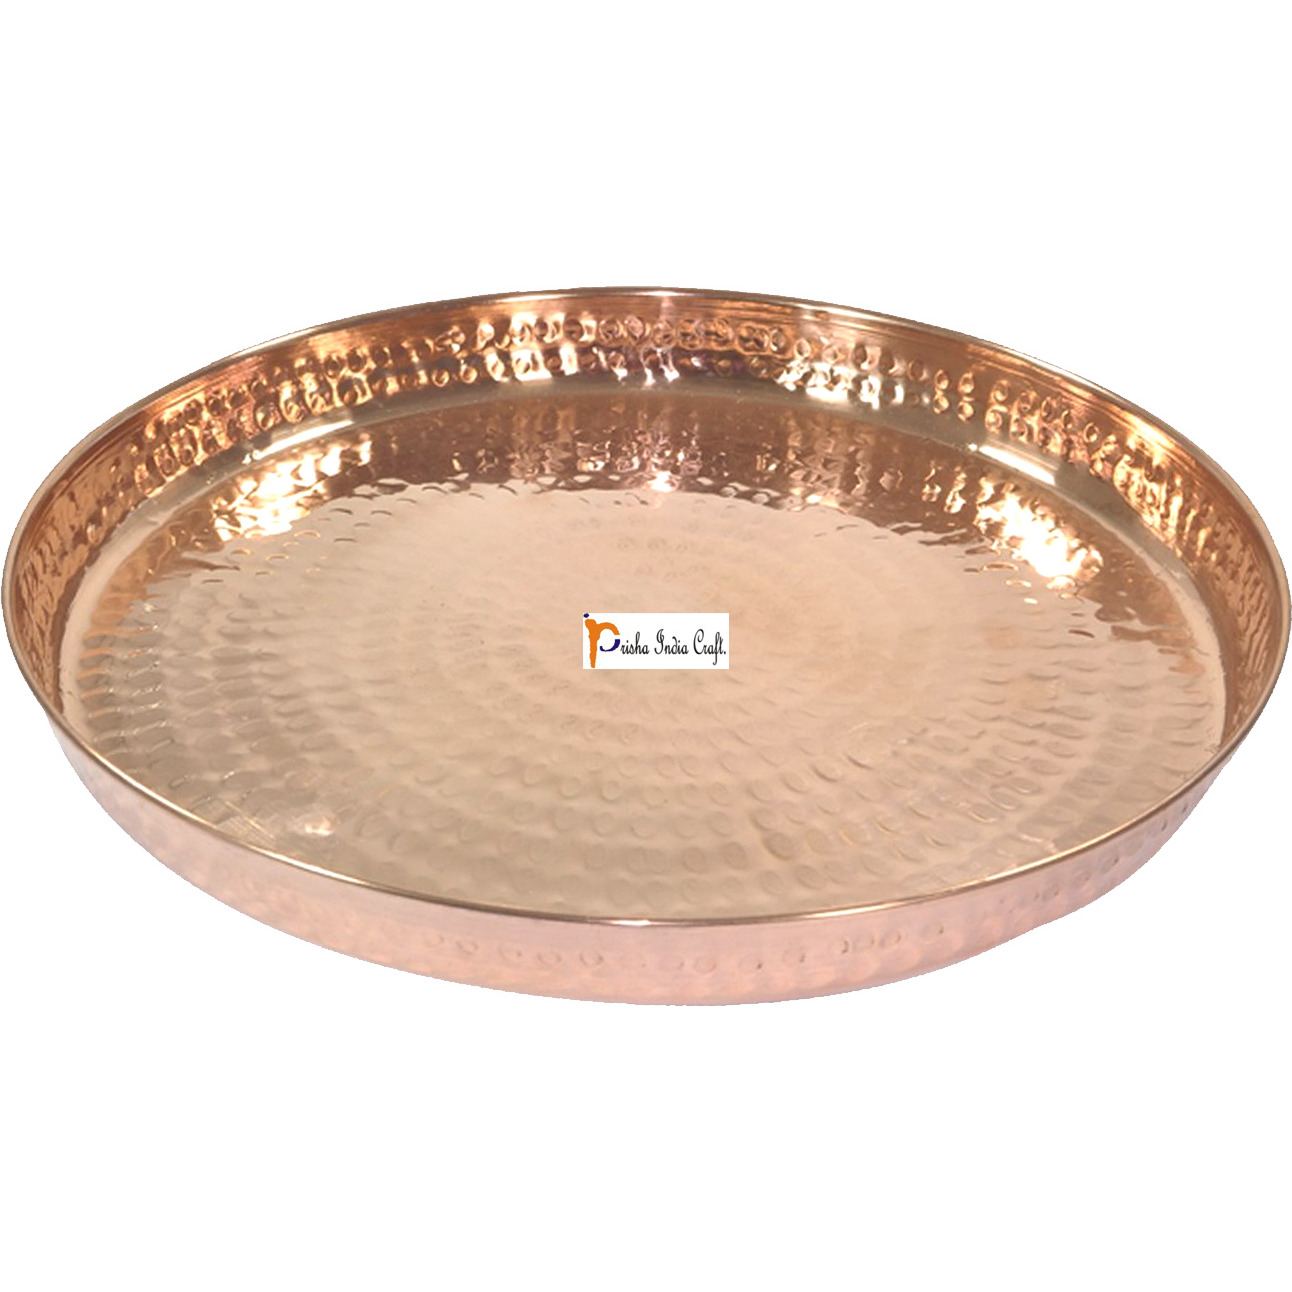 Set of 5 Prisha India Craft B. Indian Dinnerware Pure Copper Thali Set Dia 12  Traditional Dinner Set of Plate, Bowl, Spoons, Glass with Napkin ring and Coaster - Christmas Gift